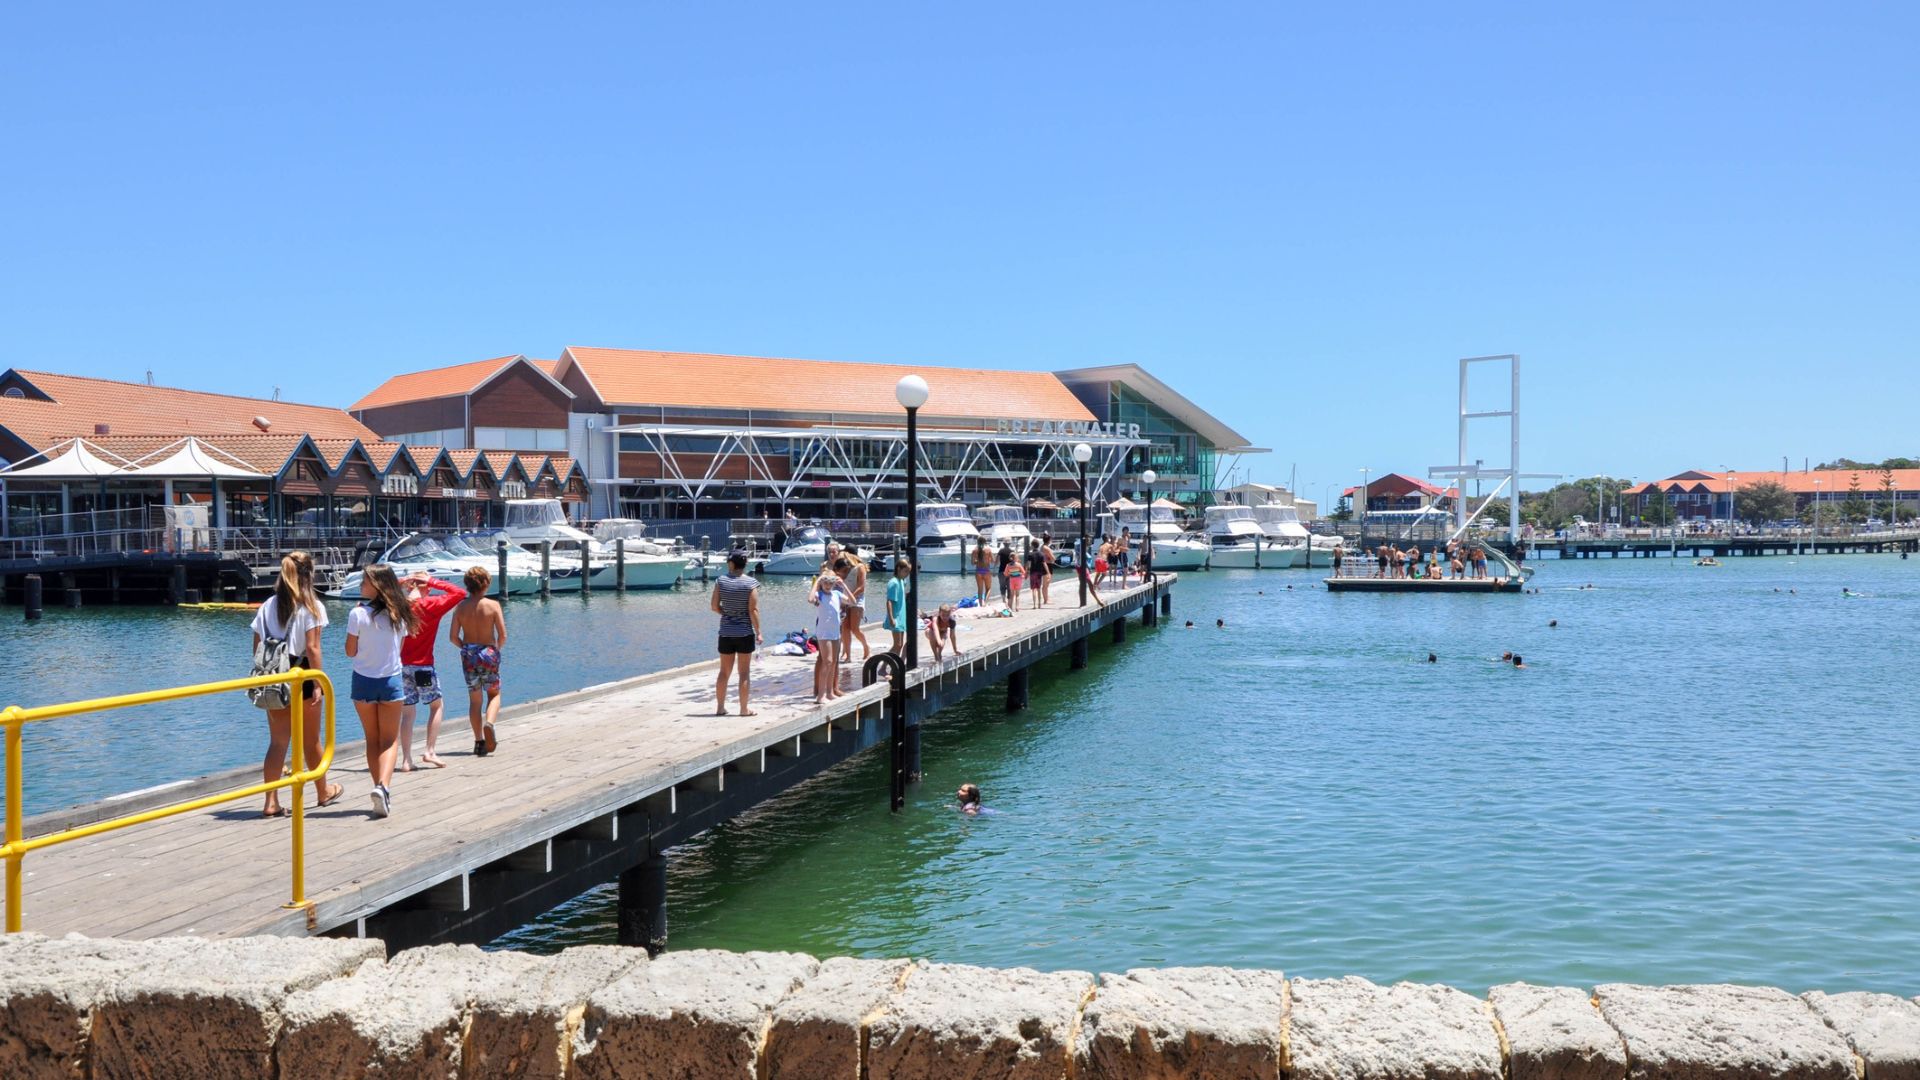 Top 10 Fishing Spots for Kids in Perth - Buggybuddys guide to Perth